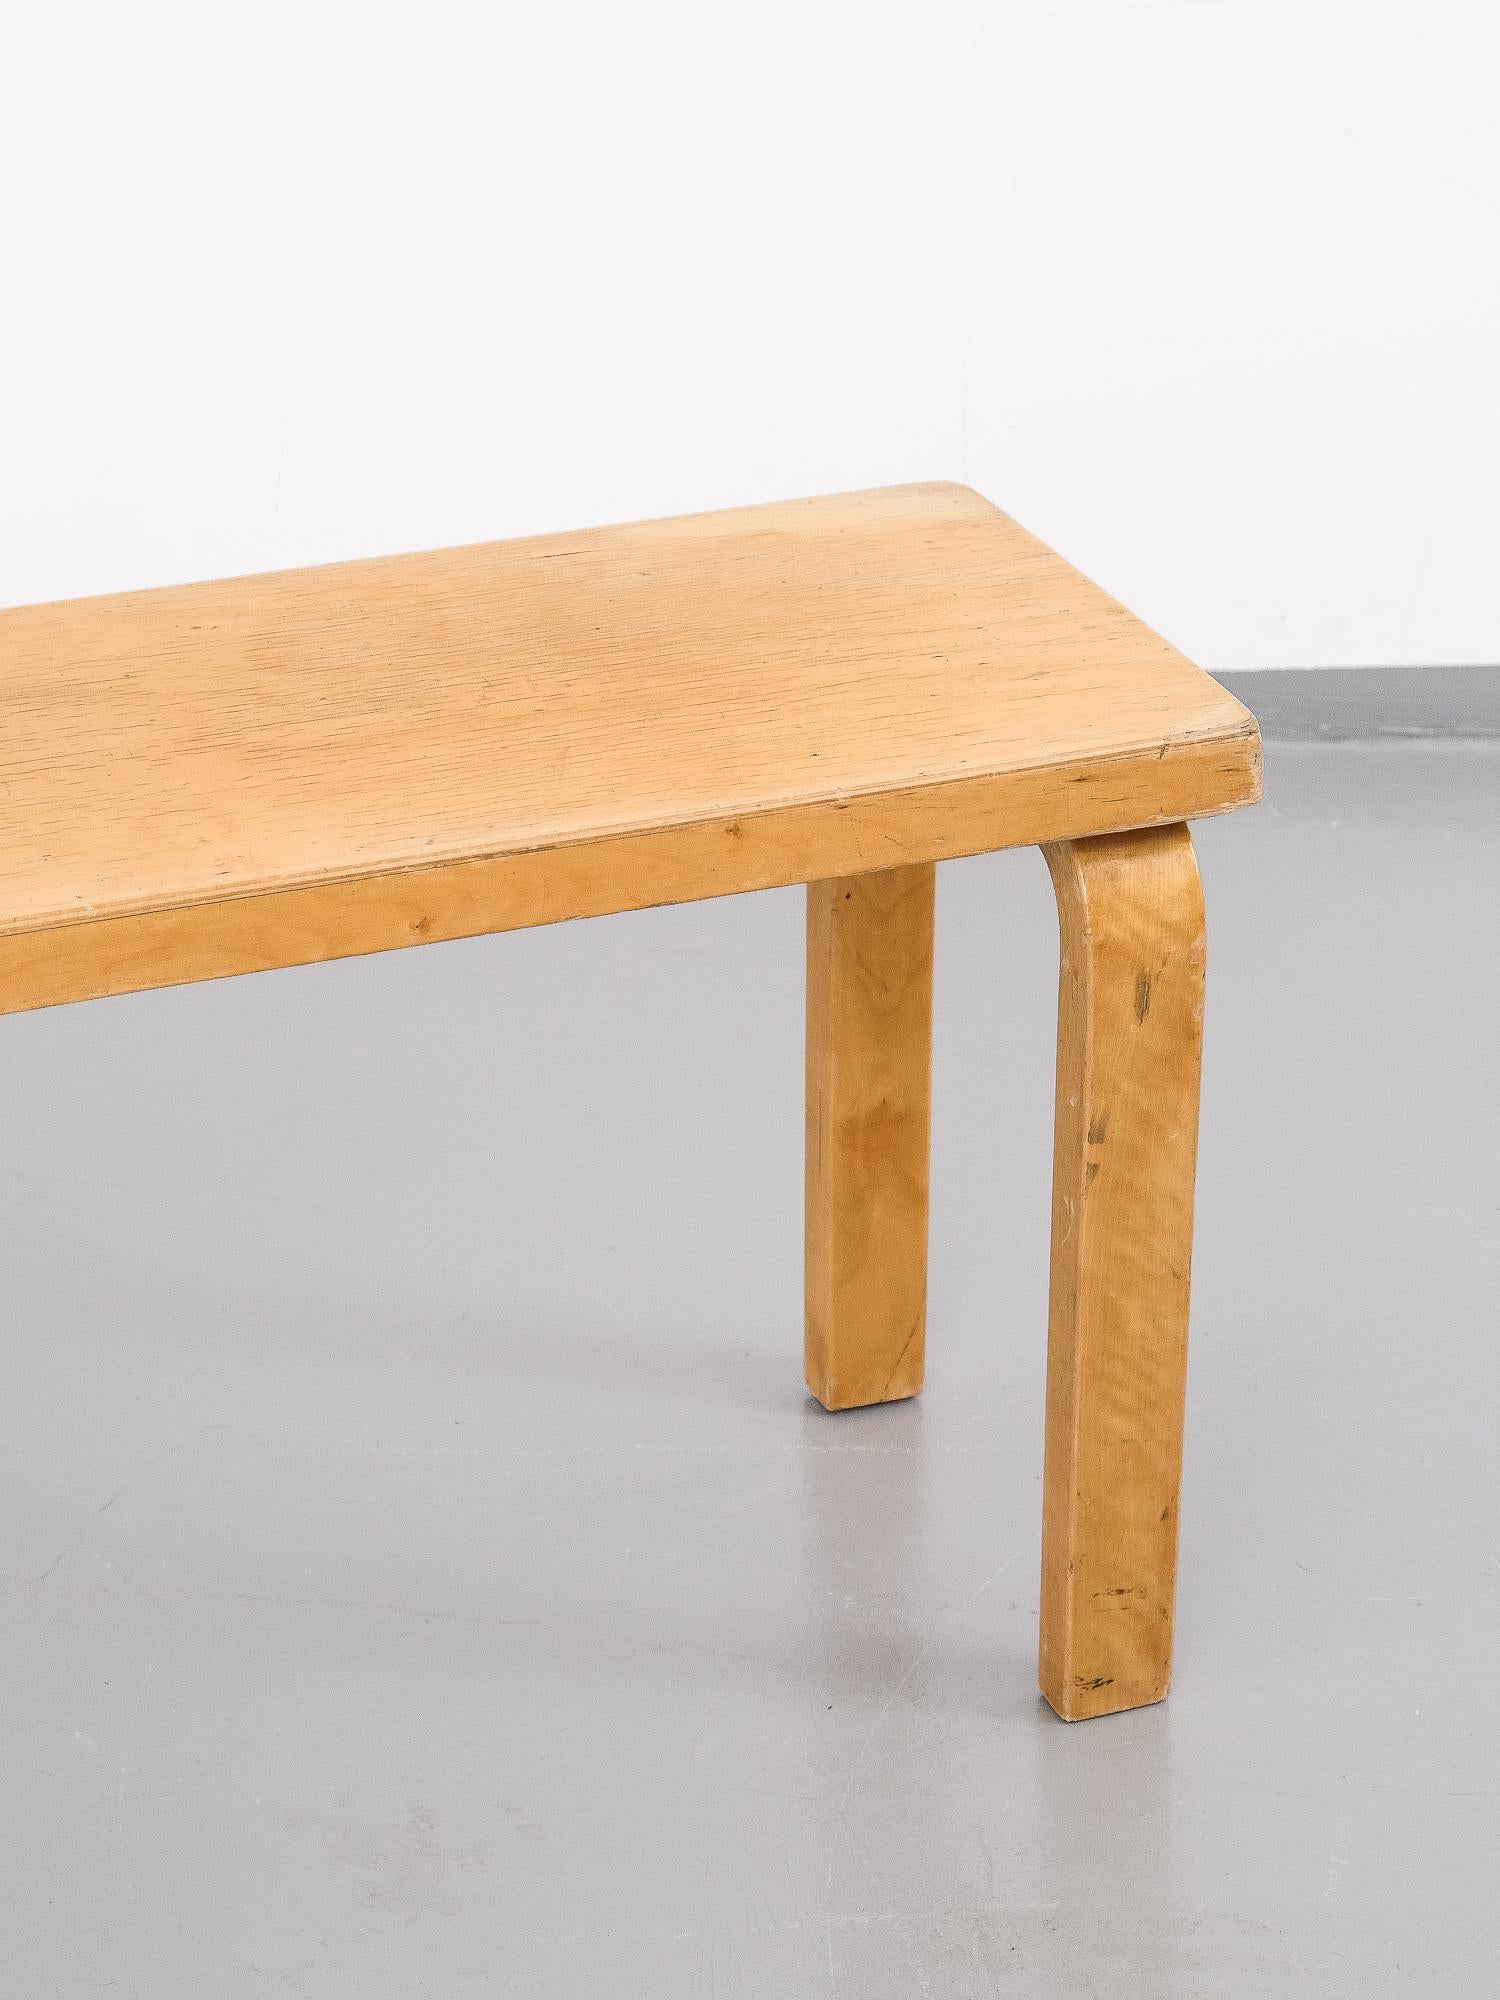 Rare customized bench designed by Alvar Aalto, Finland, circa 1950s. Comes from closed school, established in 1940s.